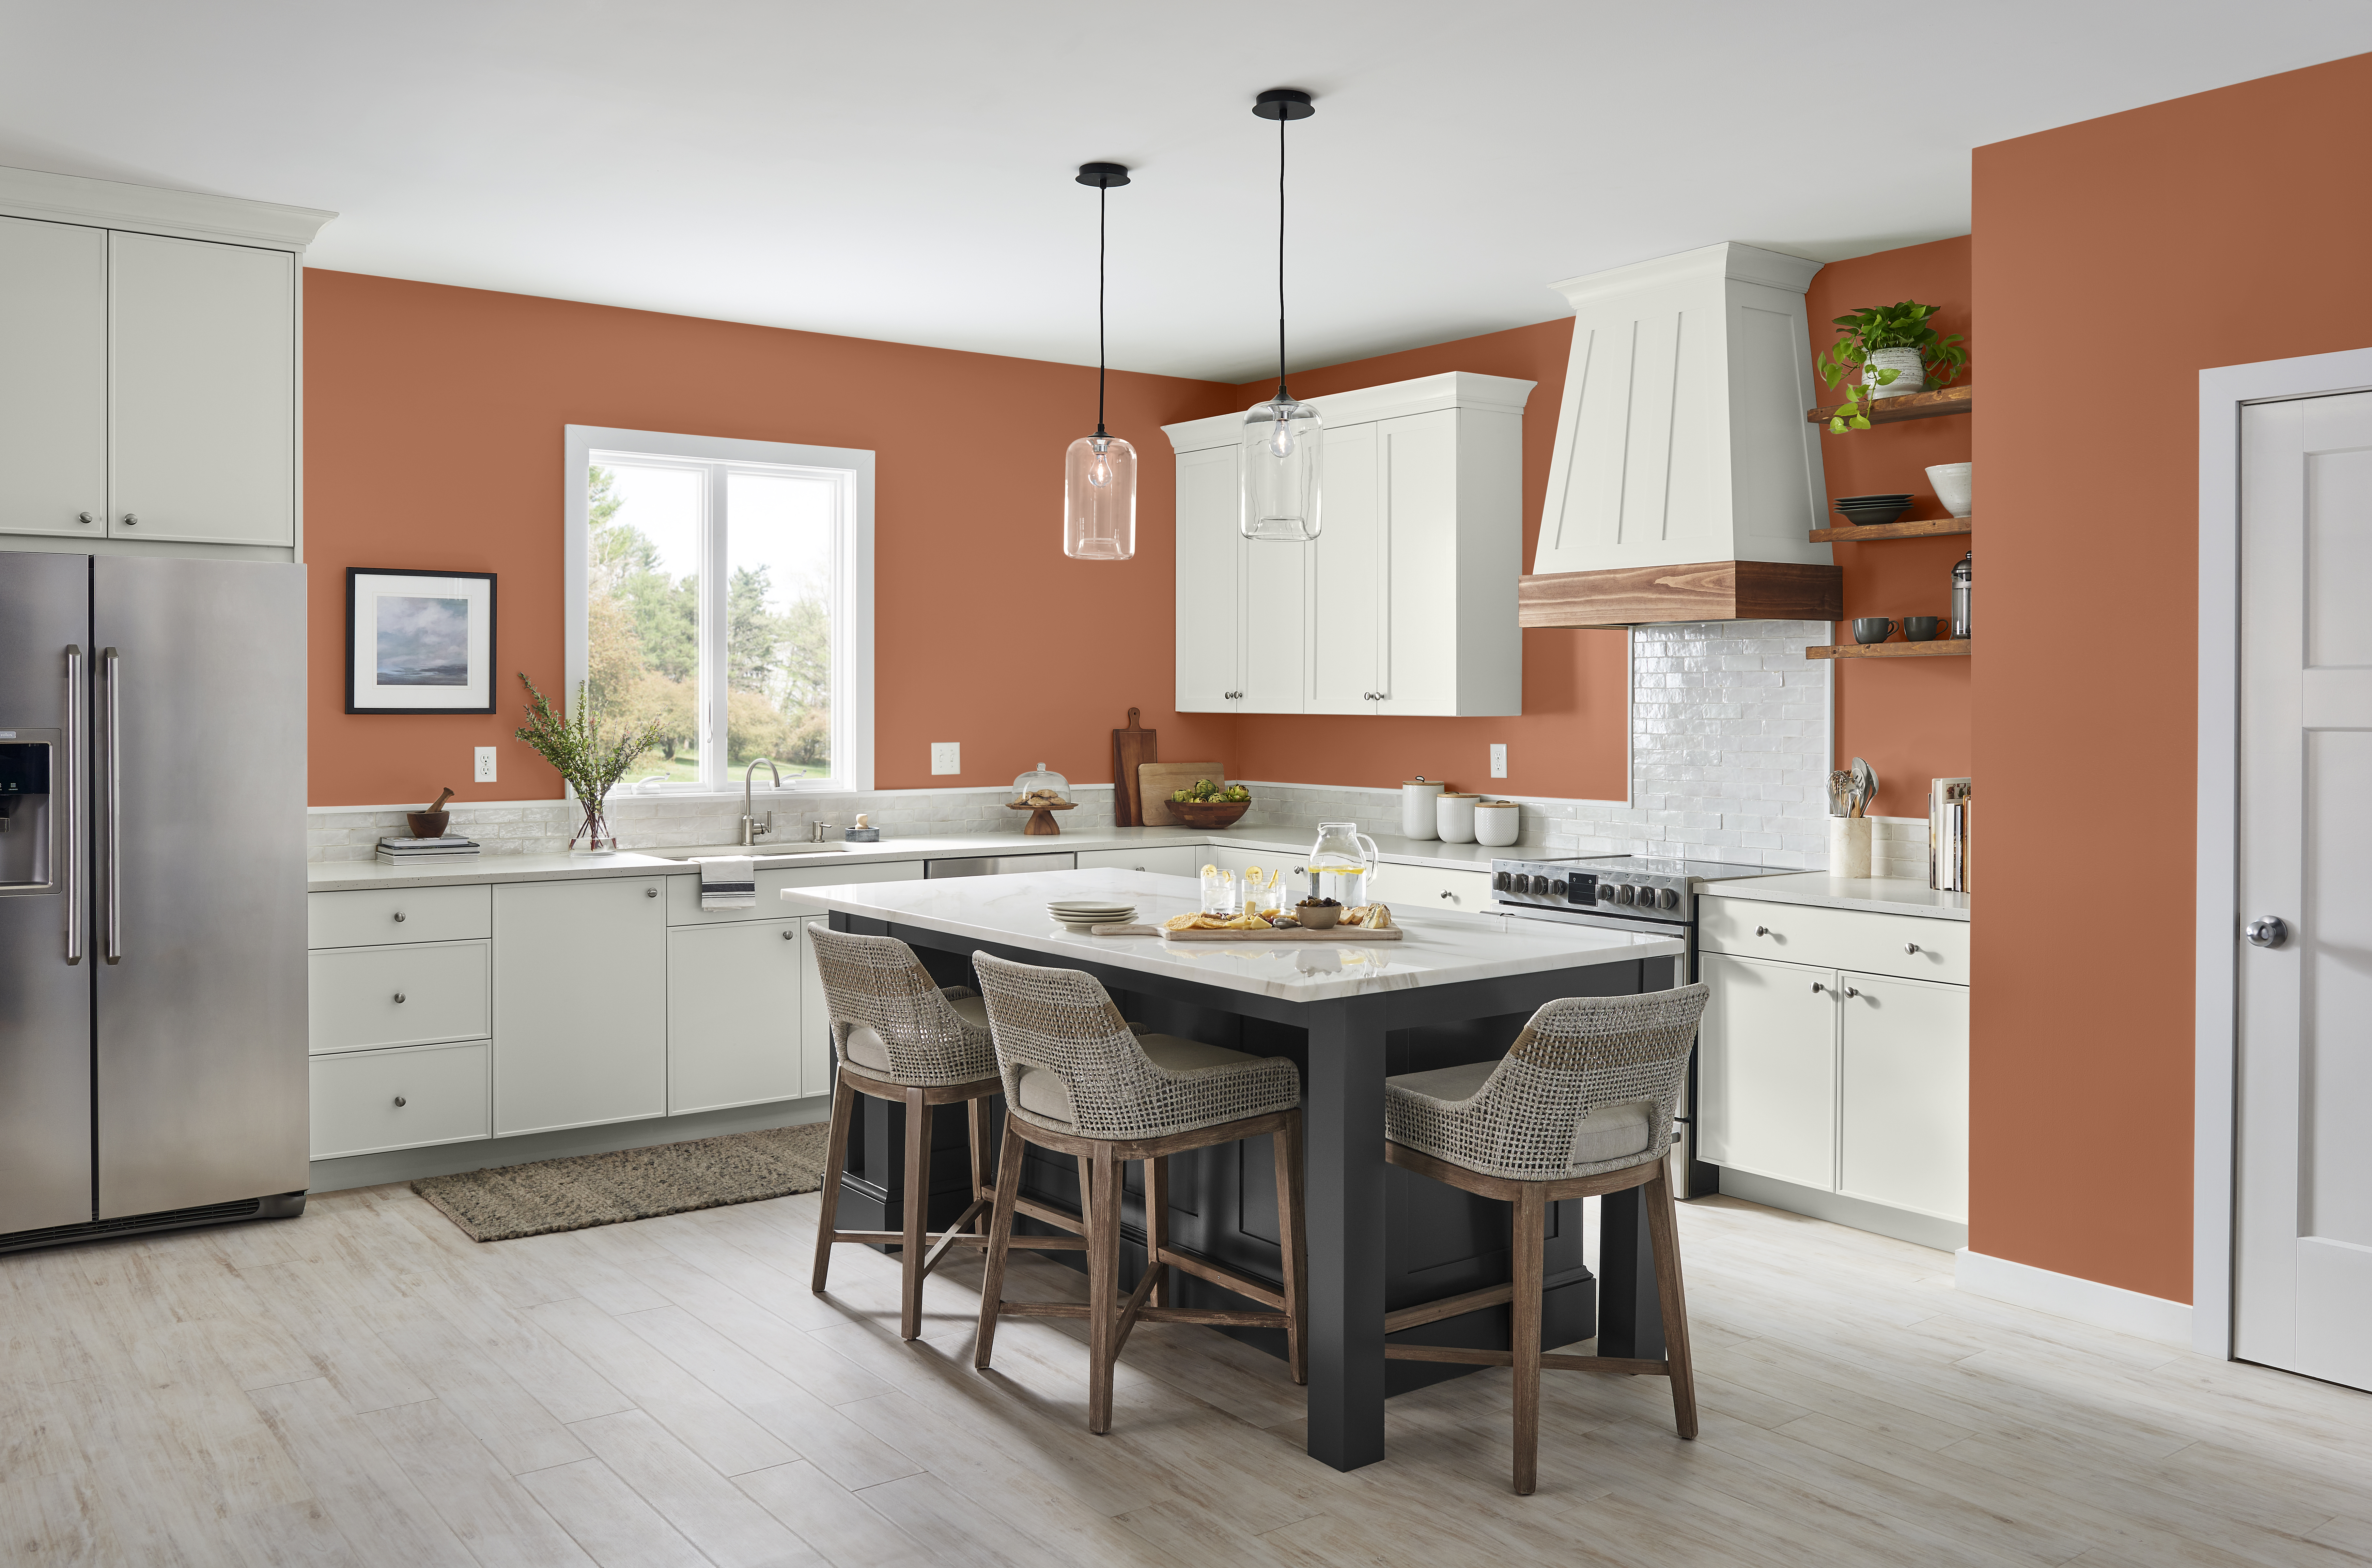 A large kitchen with walls in the colour Orange Flambe and paired with white cabinets and a black island